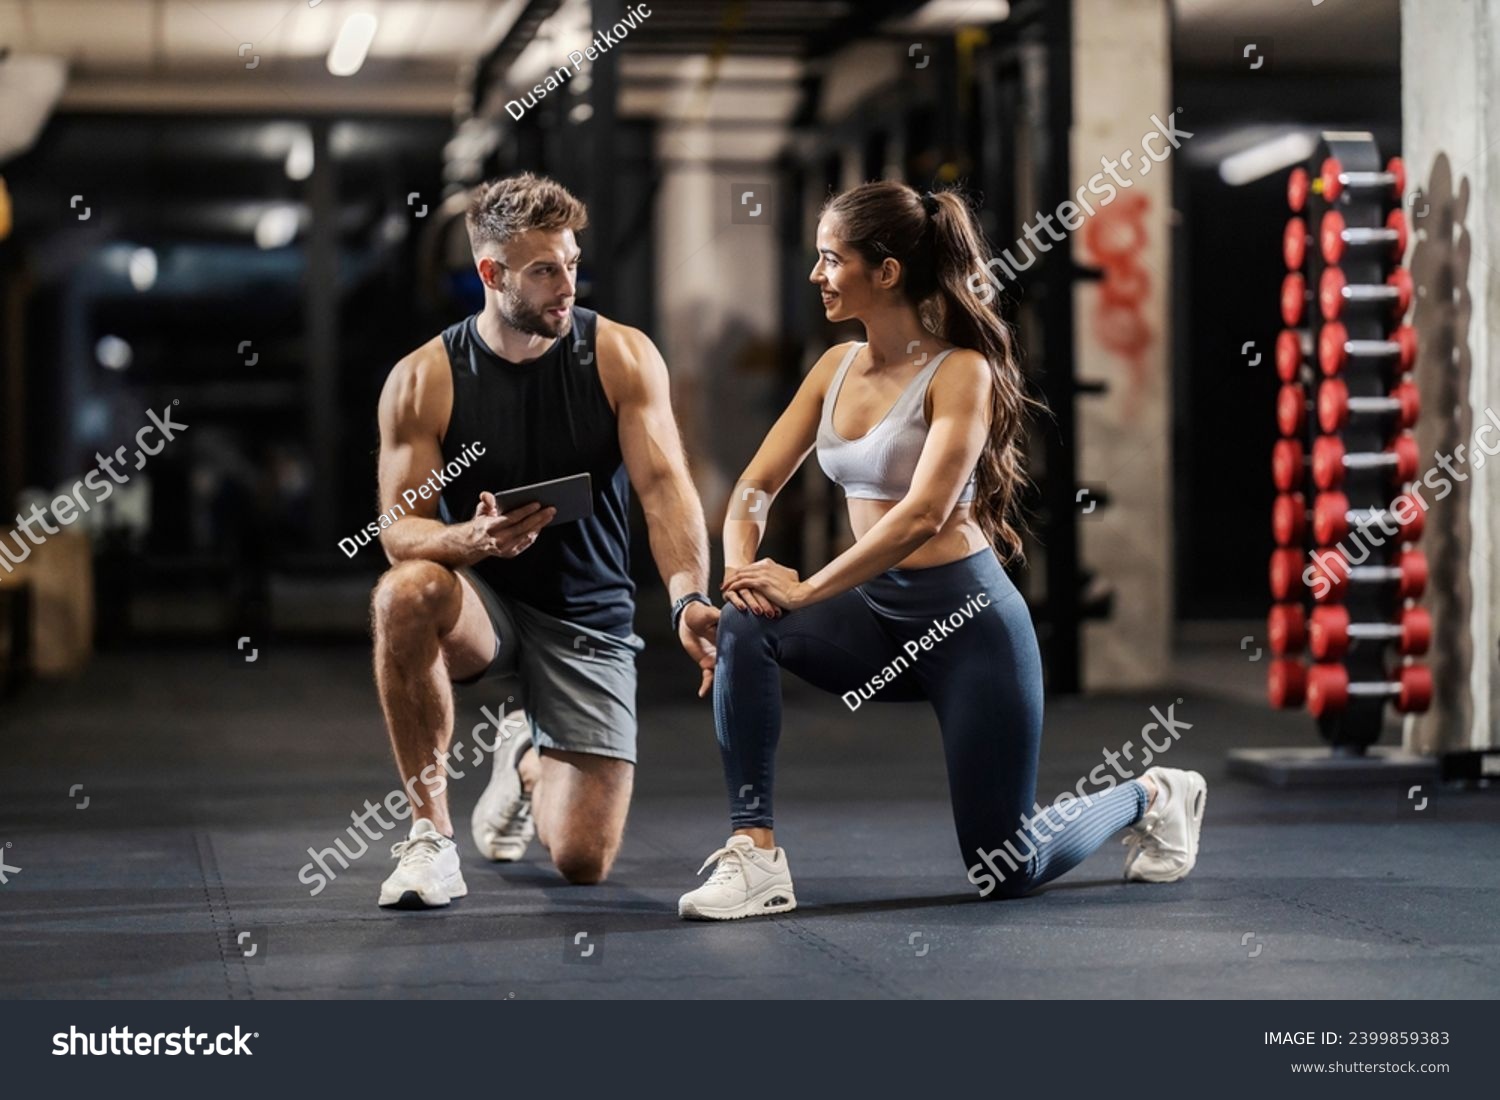 Personal trainer is showing a sportswoman how to do lunges correctly while kneeling in a gym. #2399859383